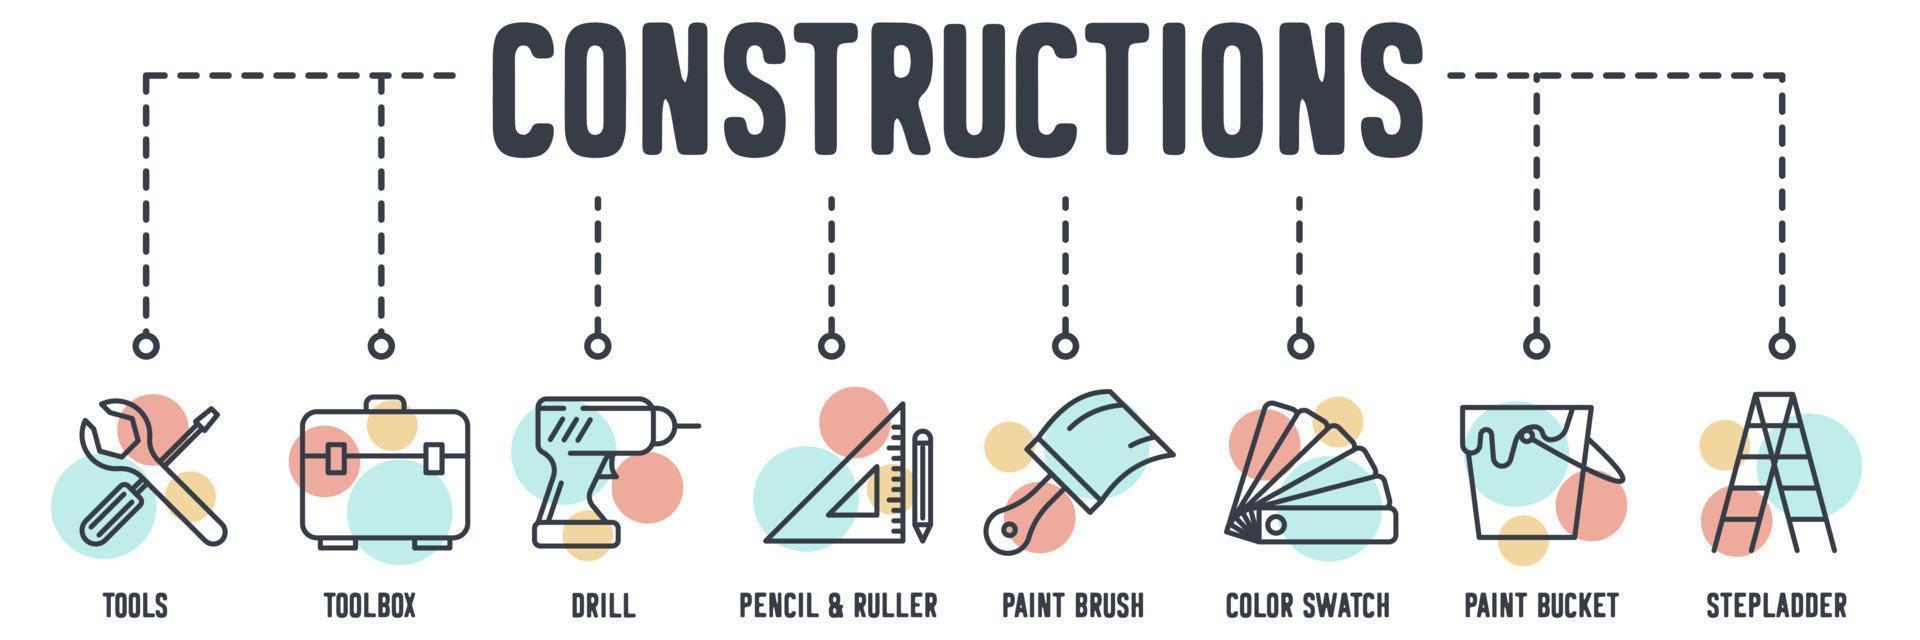 Construction banner web icon. tools, tool box, drill, pencil ruler, brush, color swatch, paint bucket, stepladder vector illustration concept.